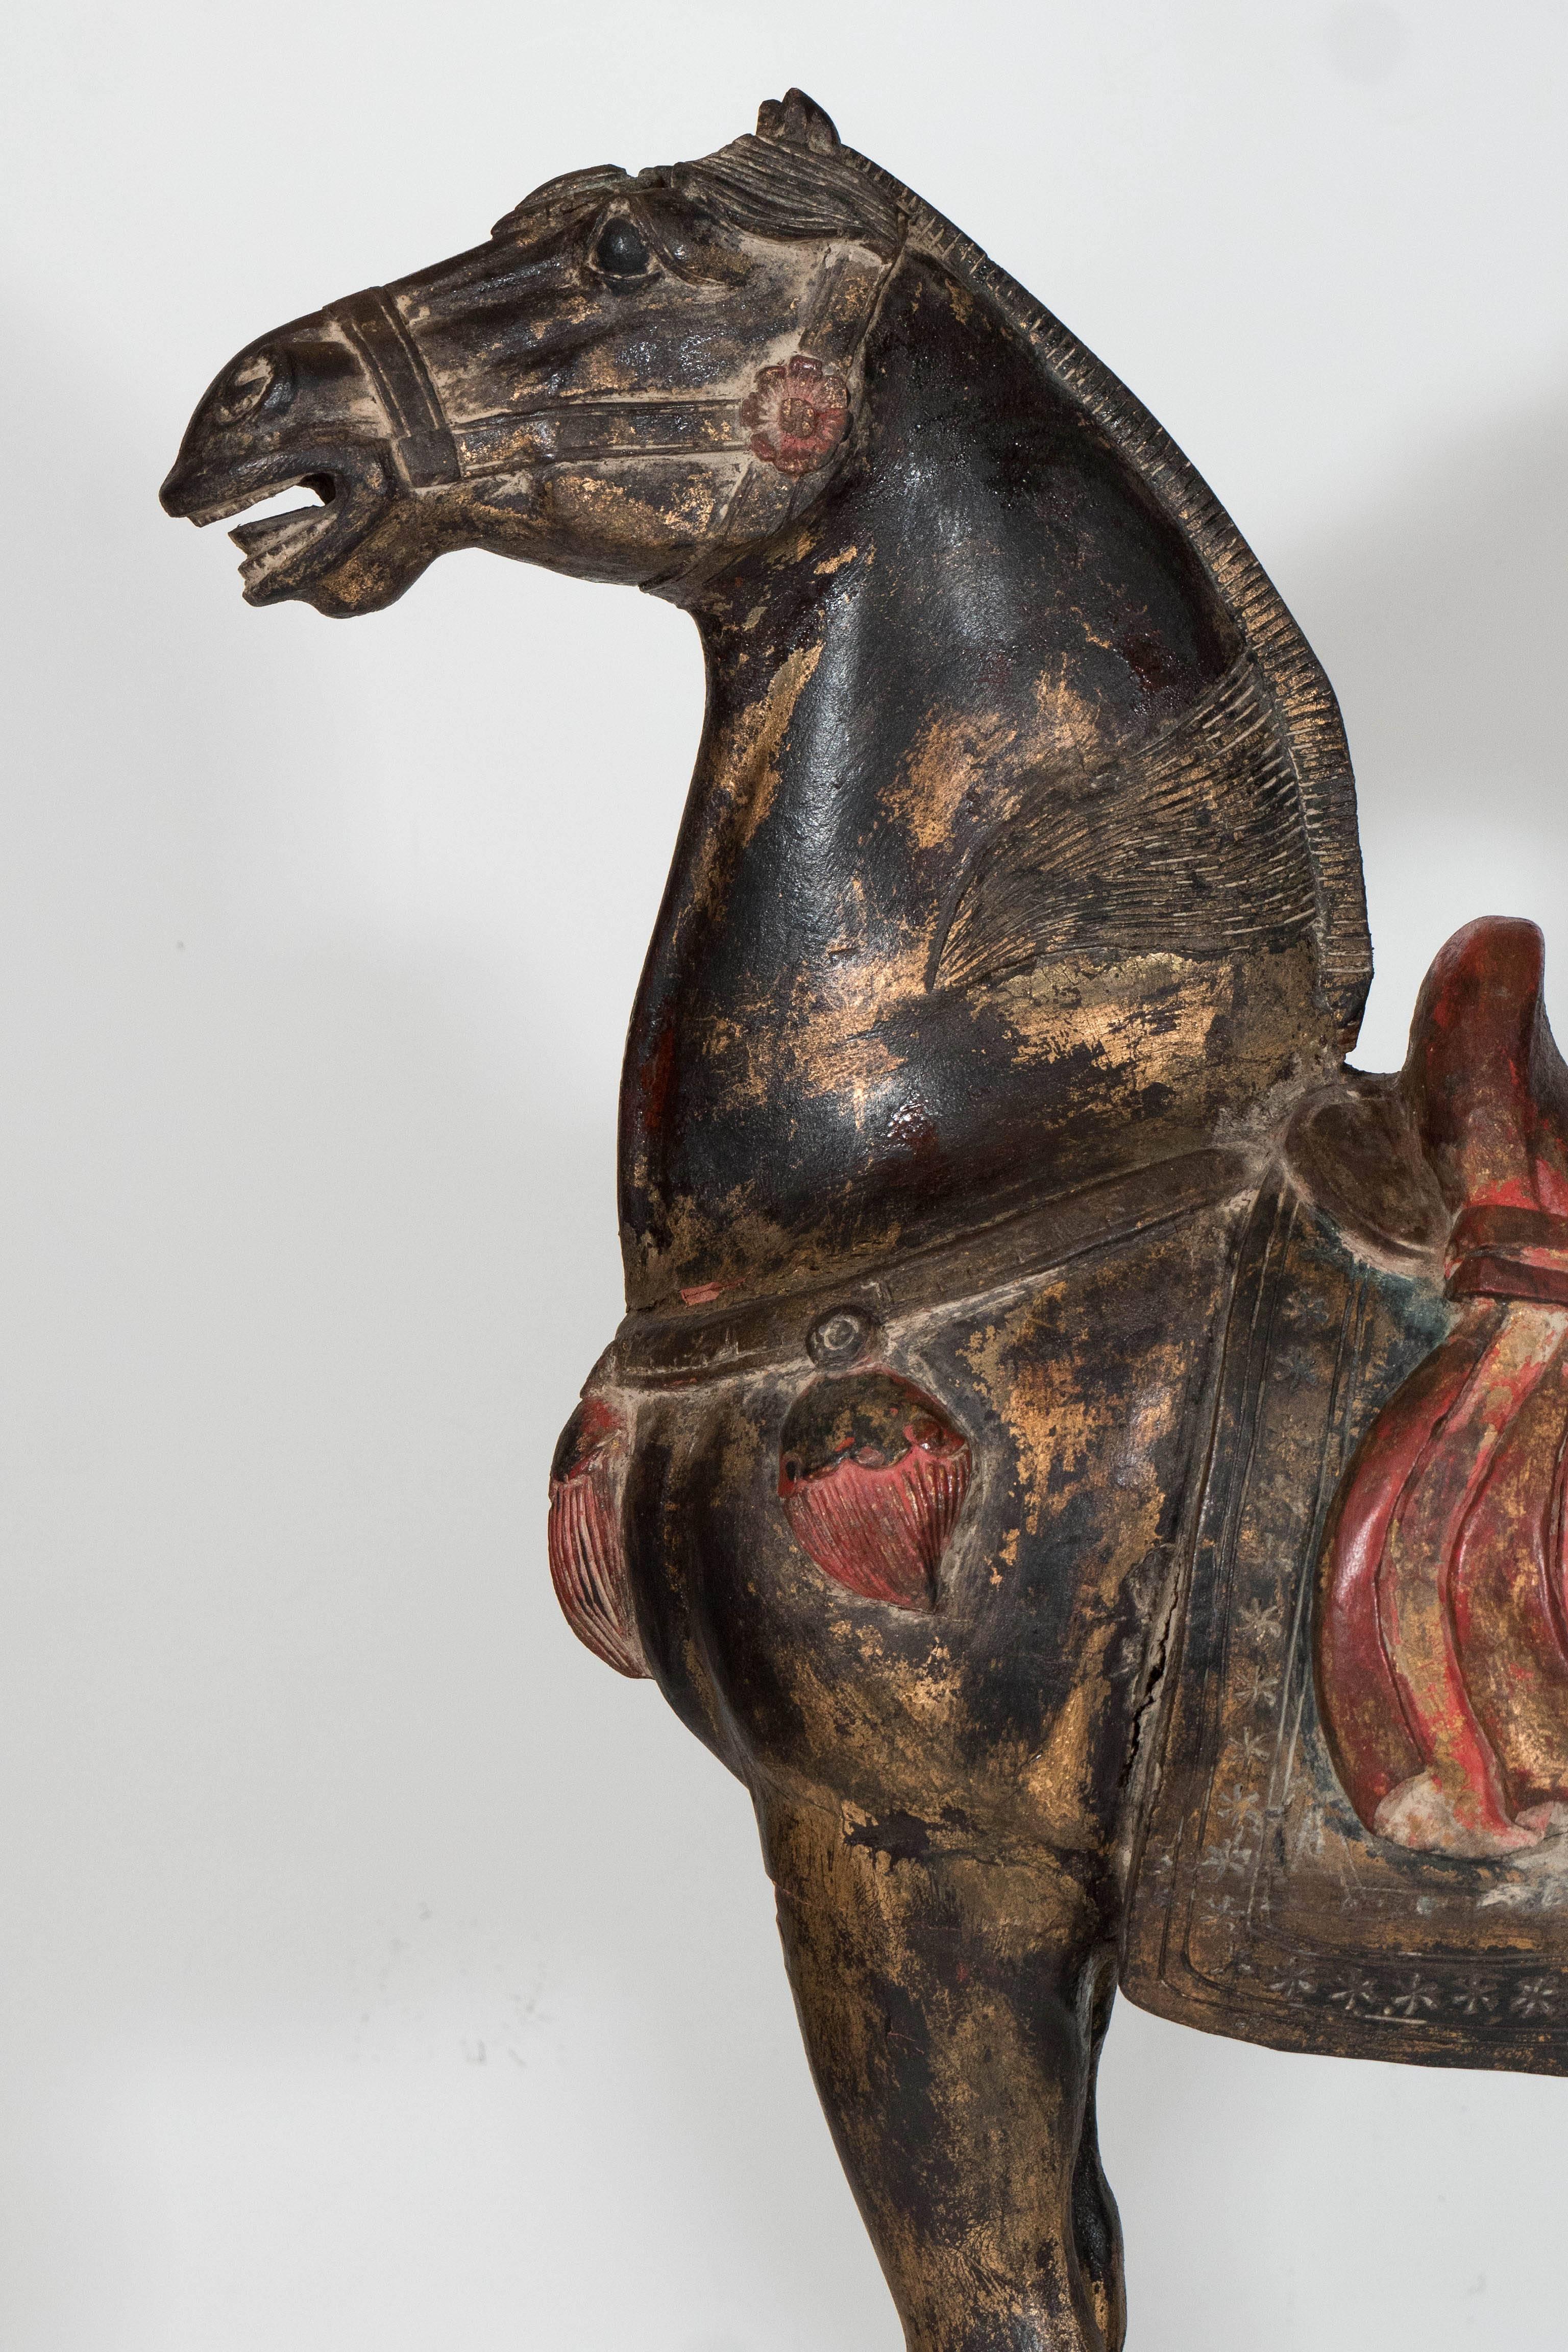 This sculptural, finely carved wooden horse, visually channeling the styles of the Tang Dynasty, was produced within the early 1900s in China, with applied gilding and polychrome. A wonderful piece in good condition, with a small amount of cracking